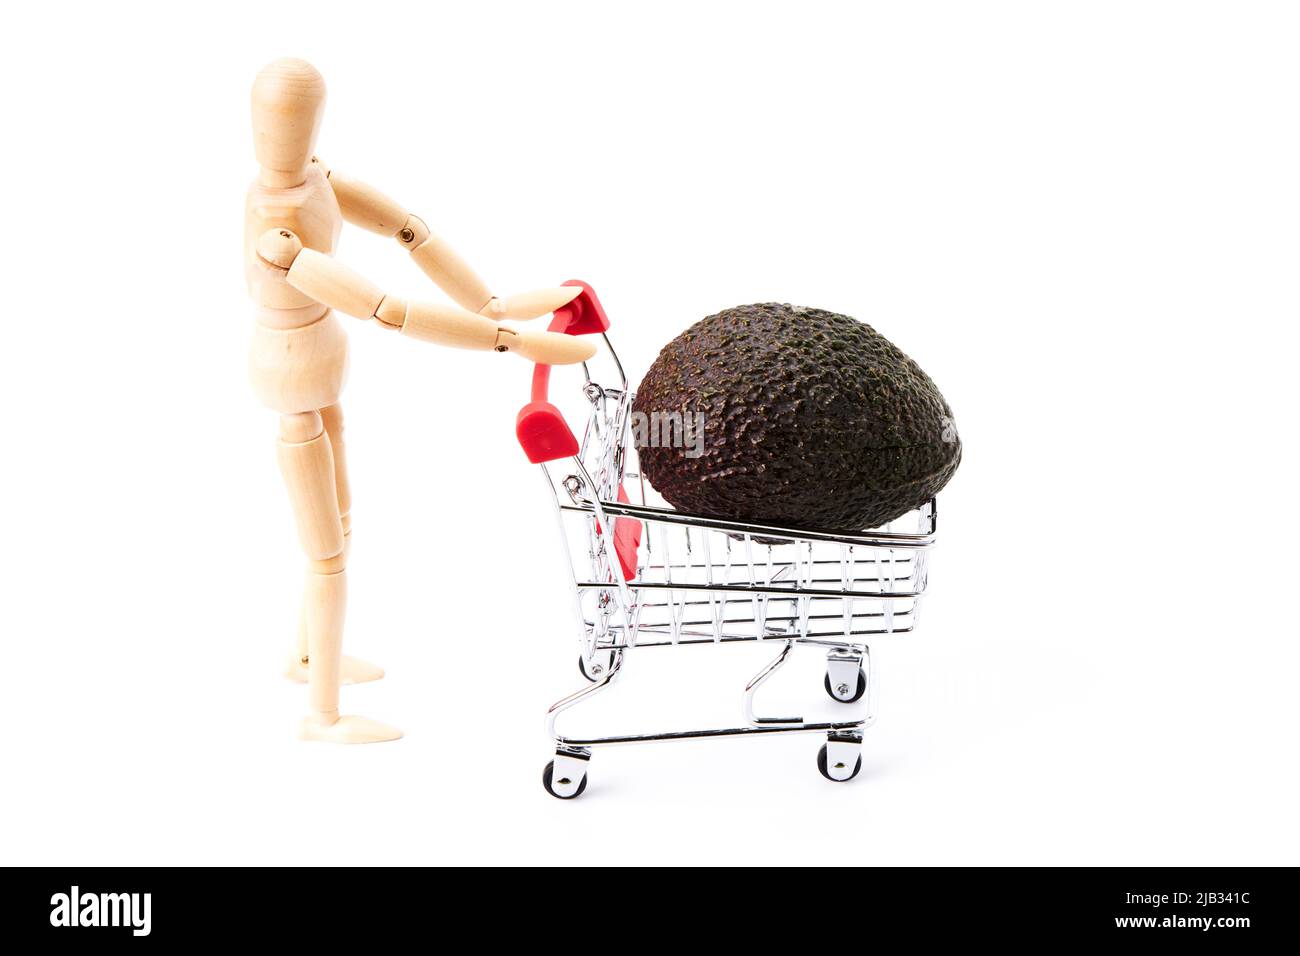 Dummy pushing a shopping cart with avocado on a white background. Shopping concept. Healthy shopping Stock Photo